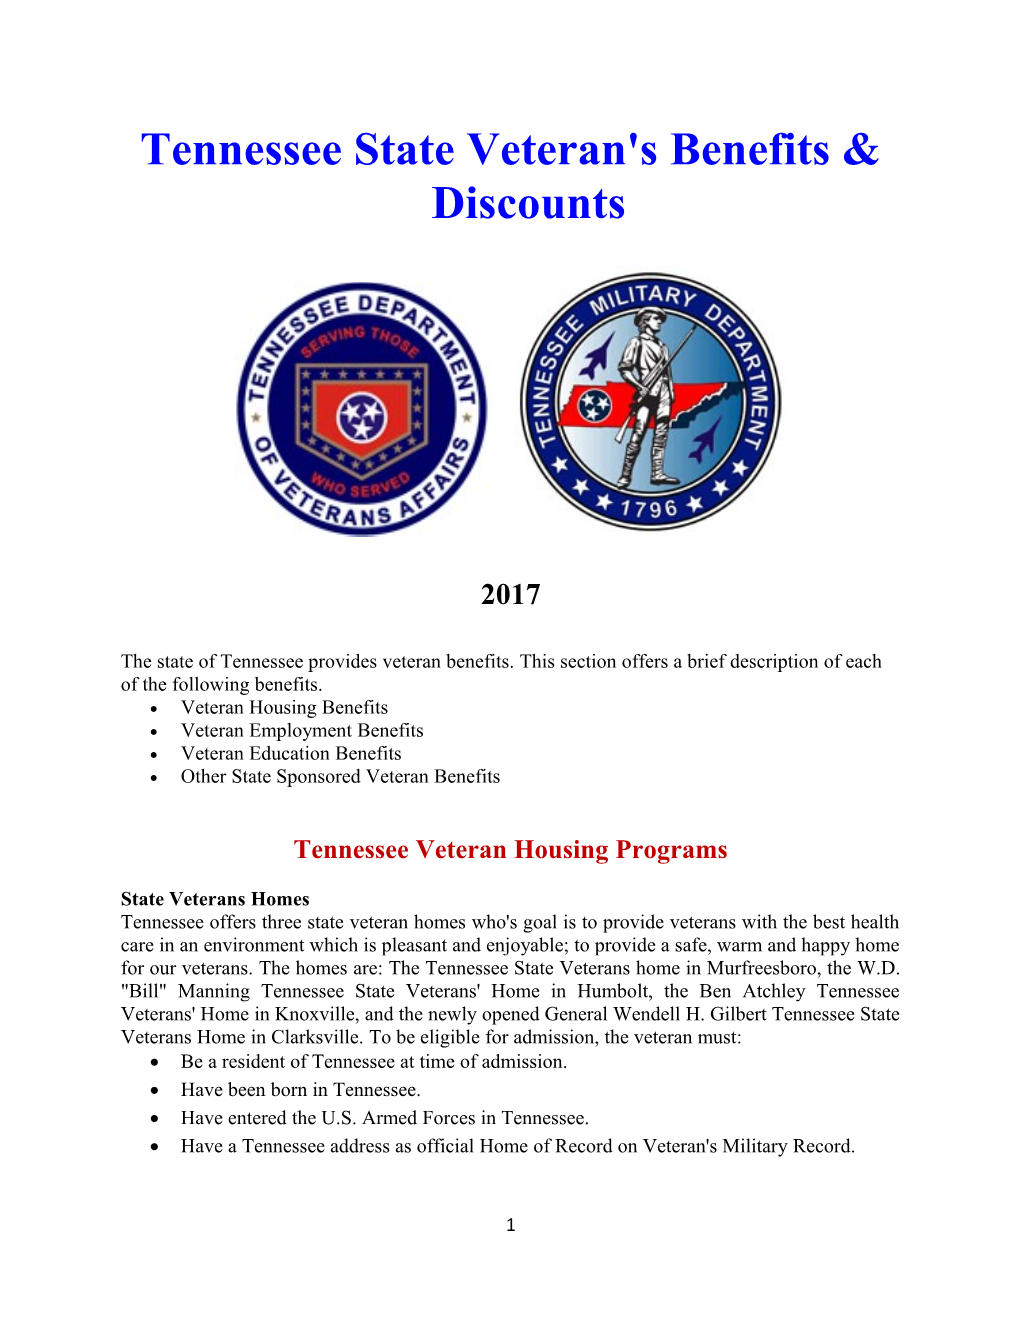 Tennessee State Veteran's Benefits & Discounts